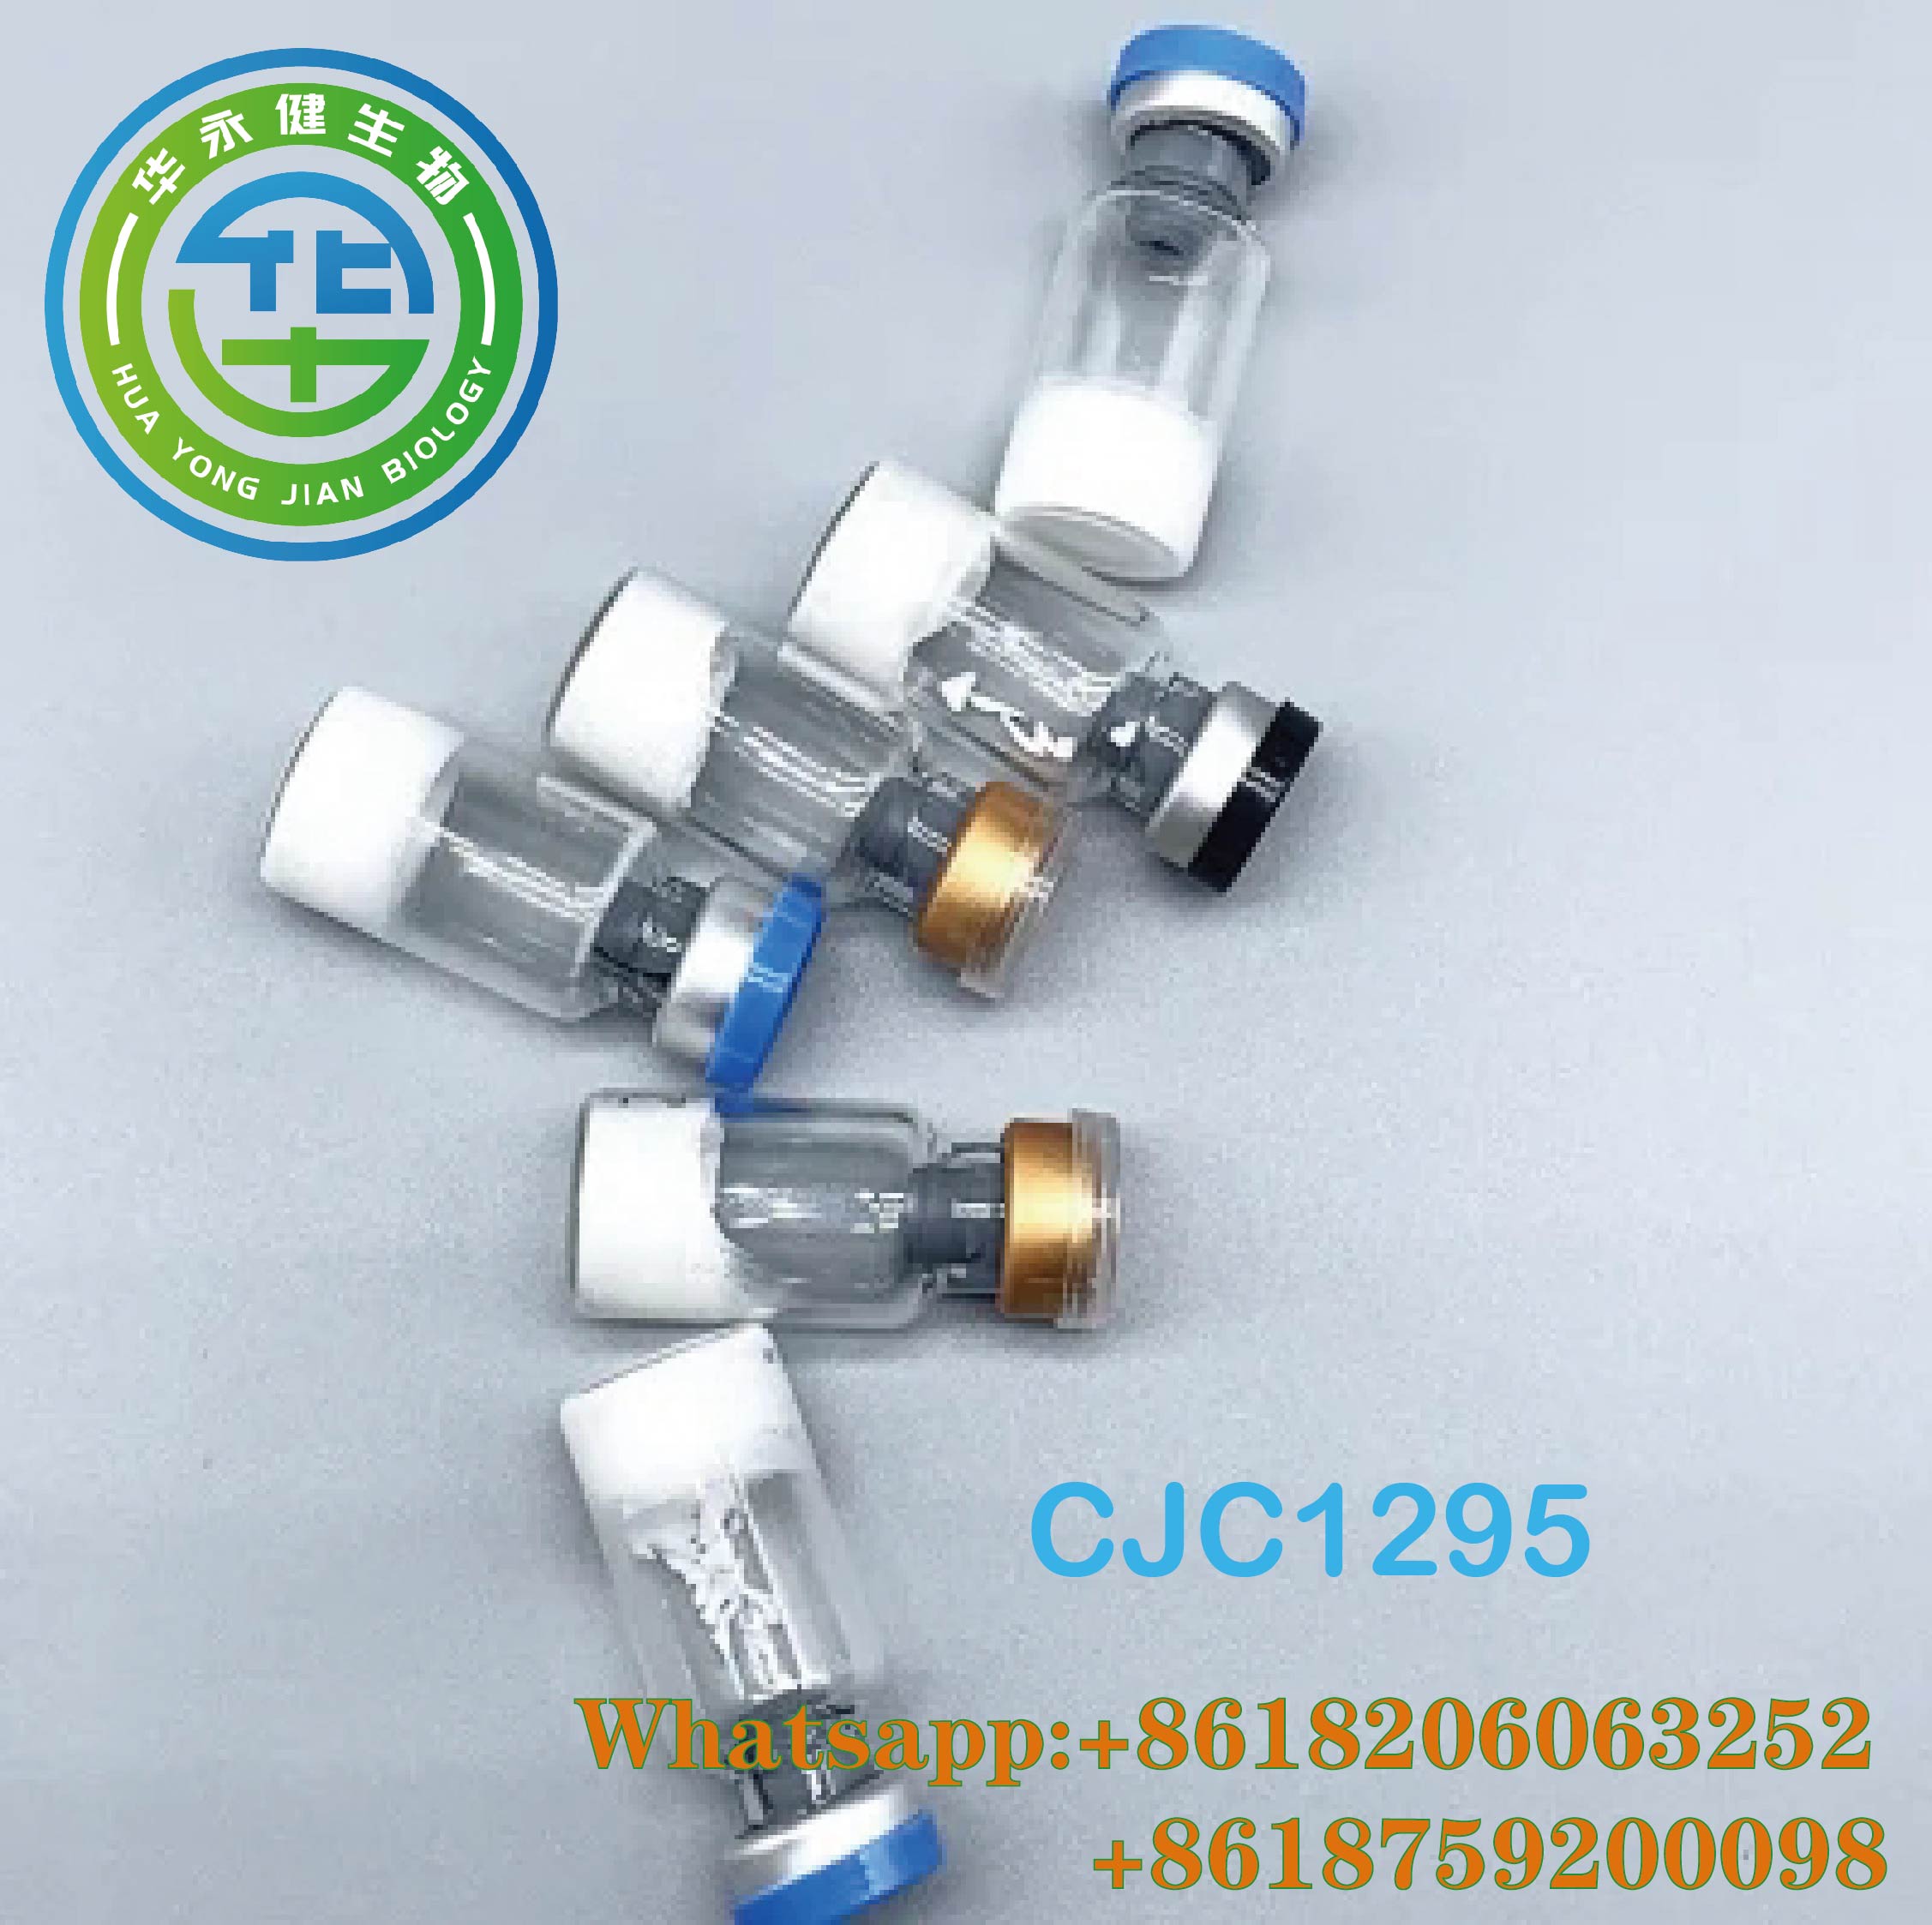 CJC-1295 is a peptide hormone that mimics the abilities and effects of GHRH, a naturally occurring hormone in the human body.